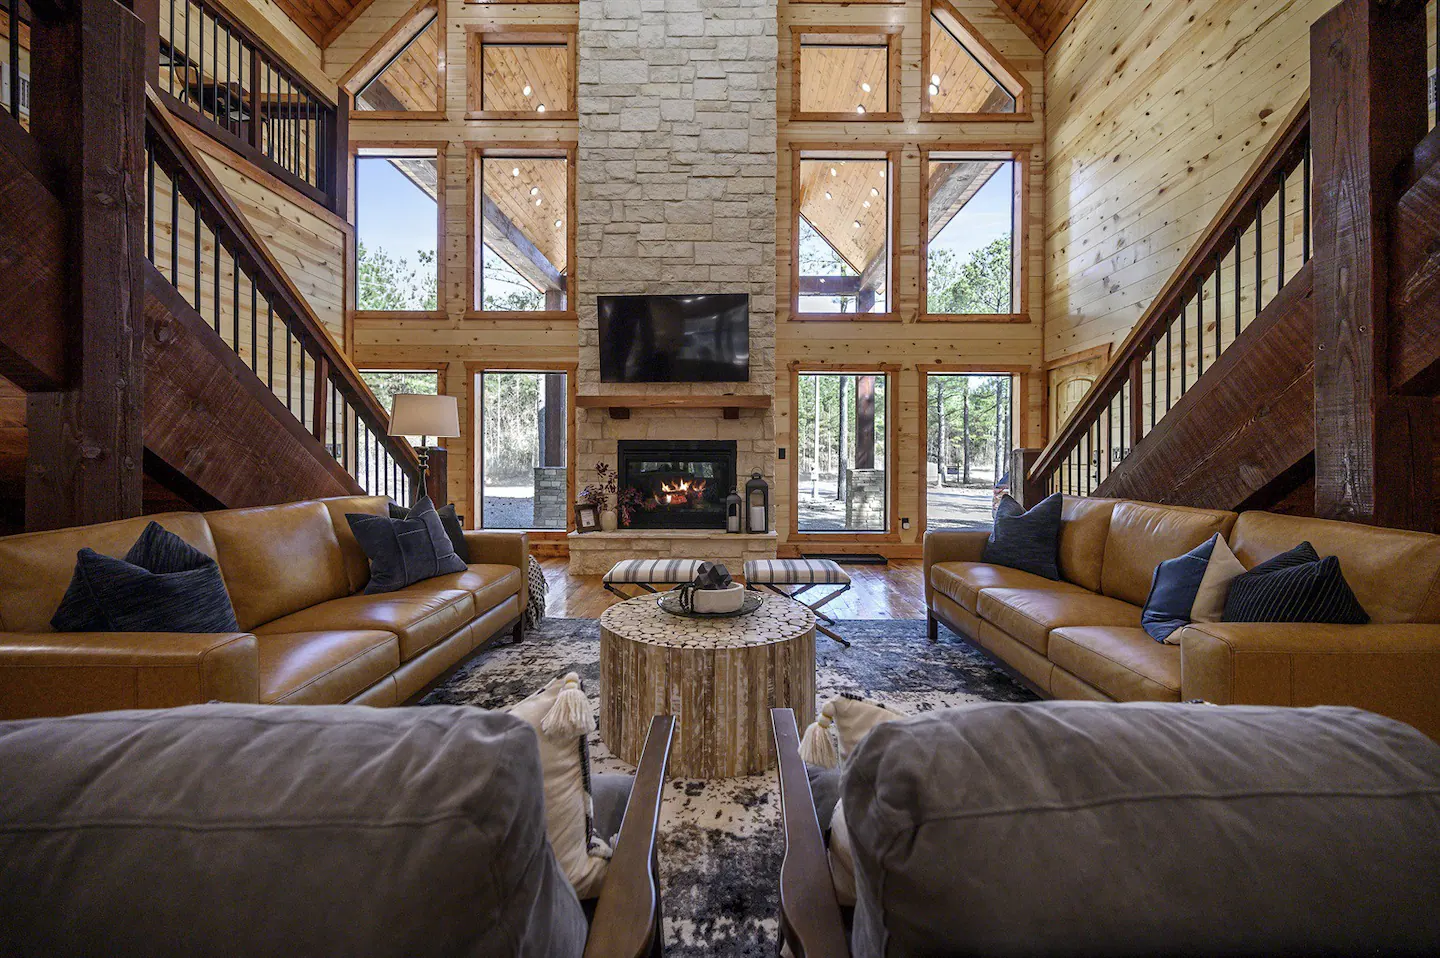 The family room boasts towering windows that allow natural sunlight to flood in, a substantial fireplace, a large-screen TV, and multiple seating areas.